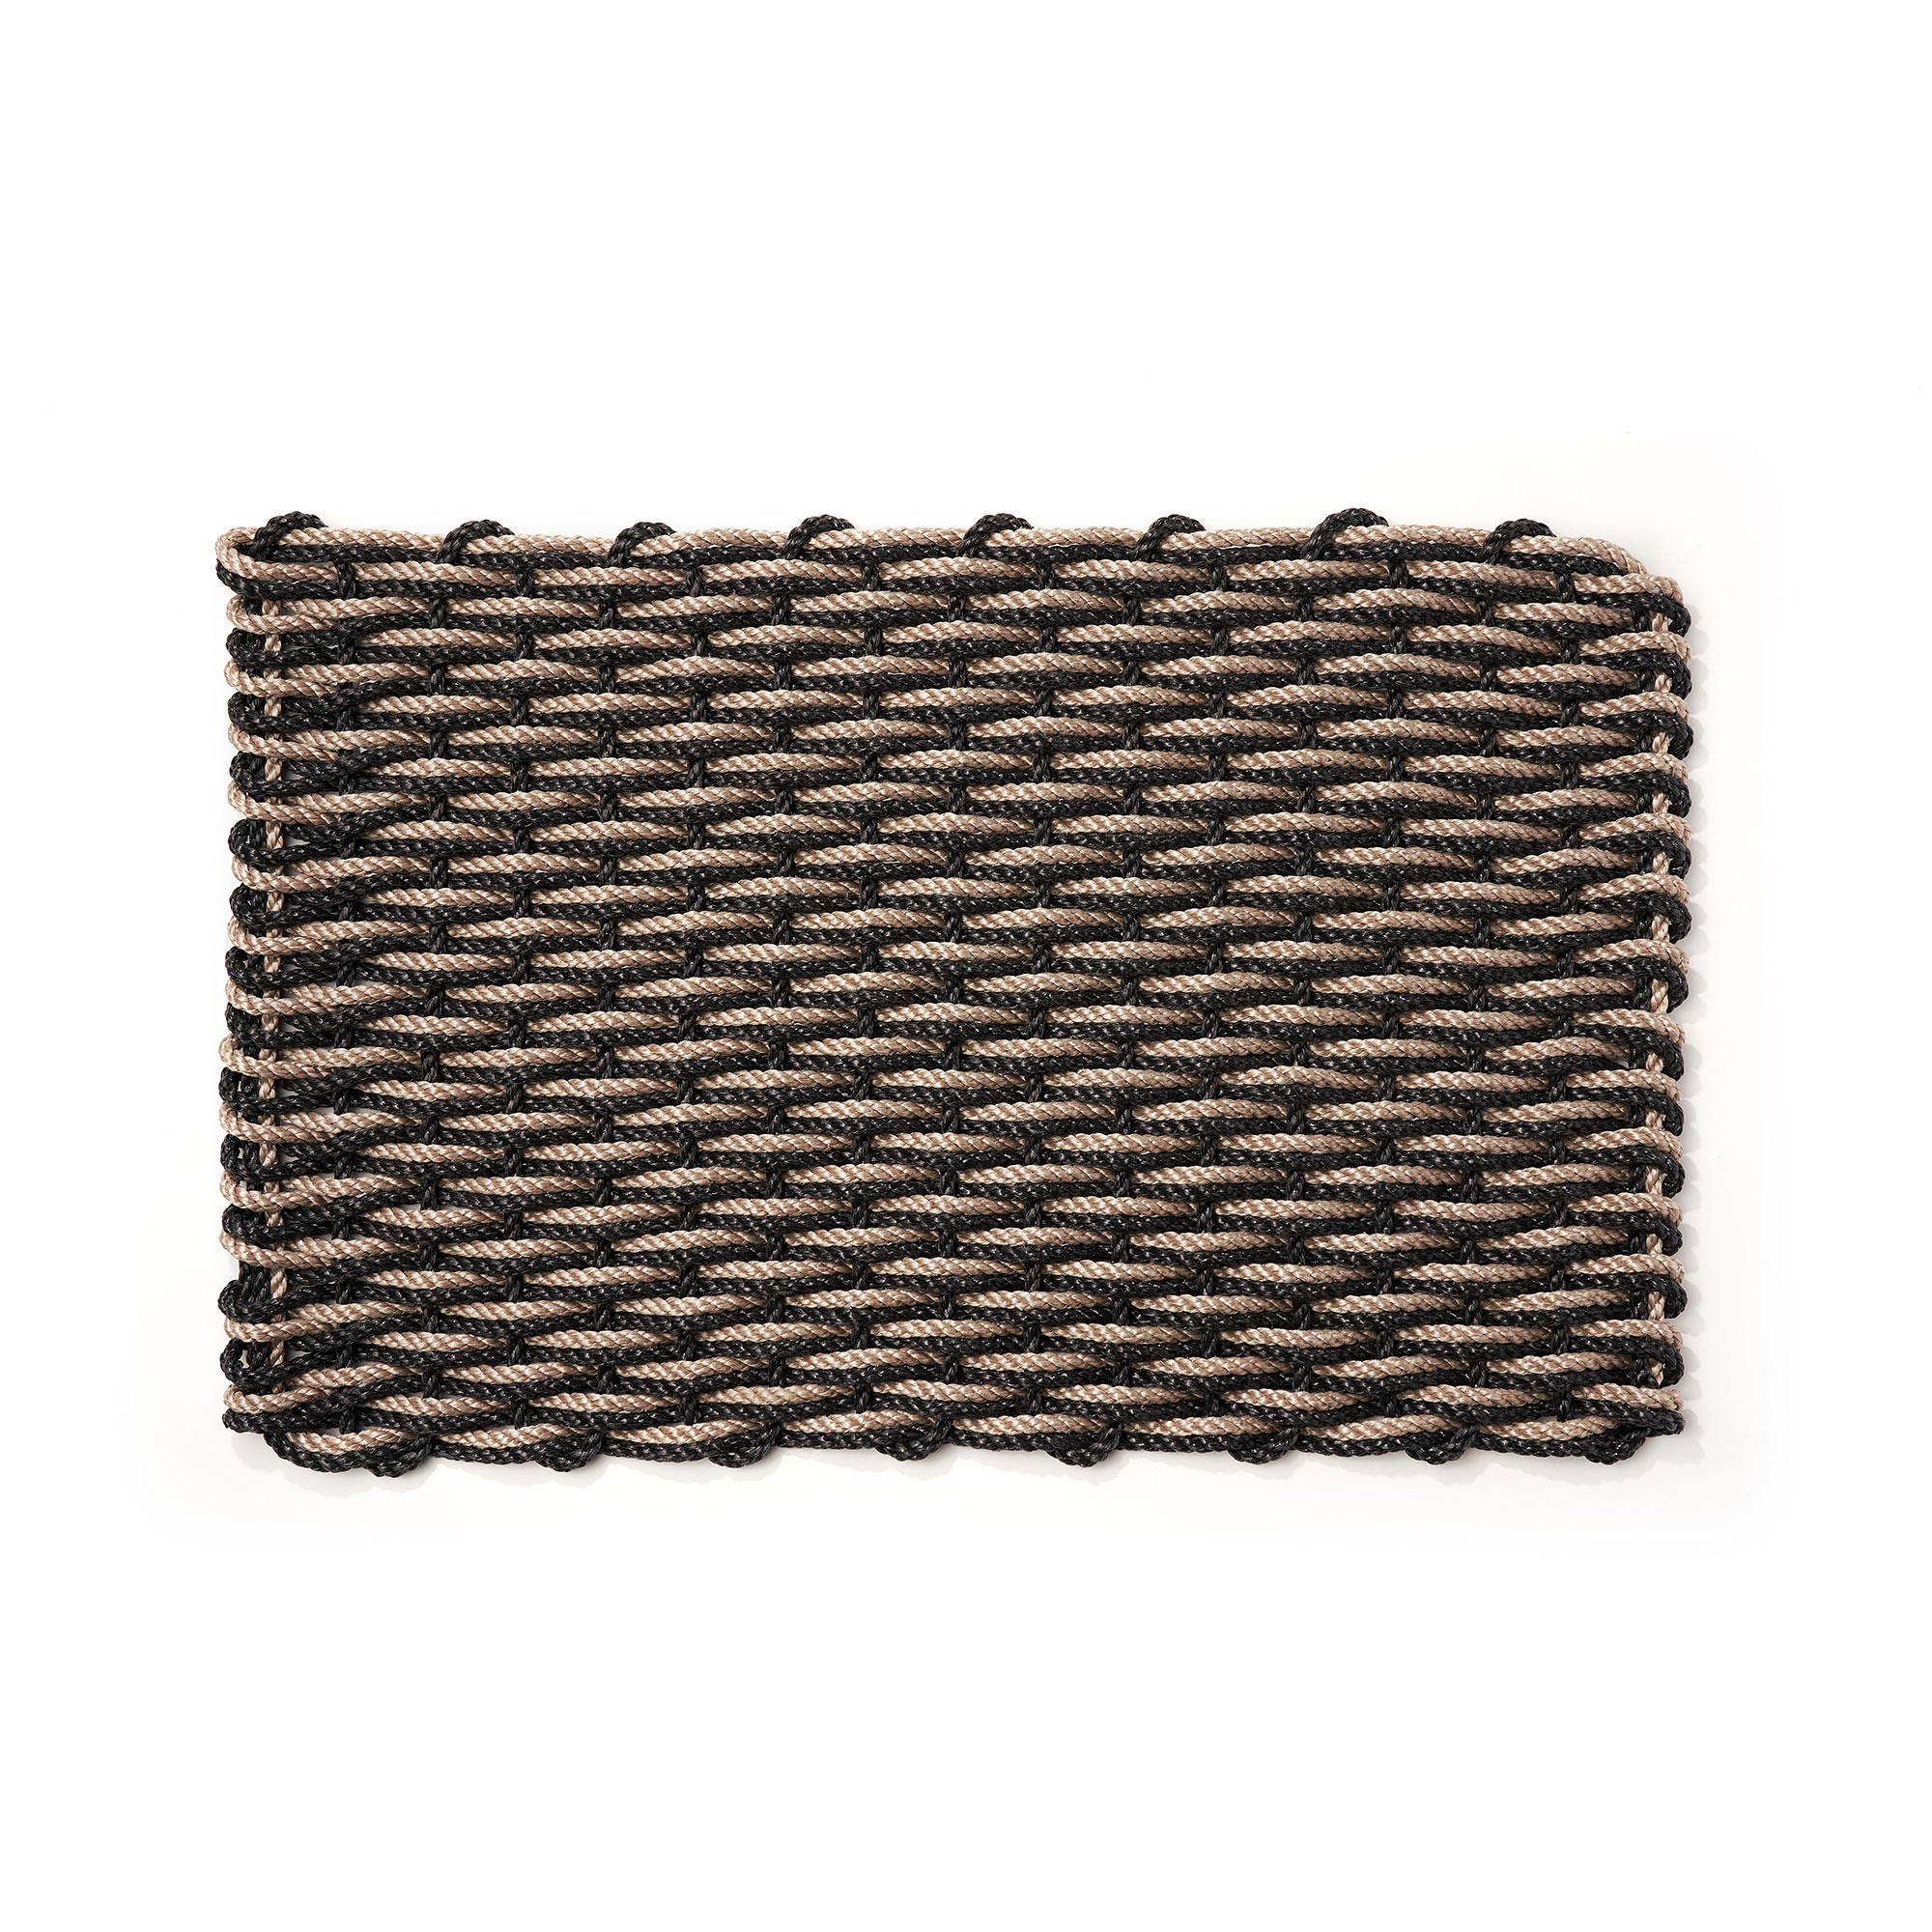 The Rope Co. Sand & Charcoal Doormat